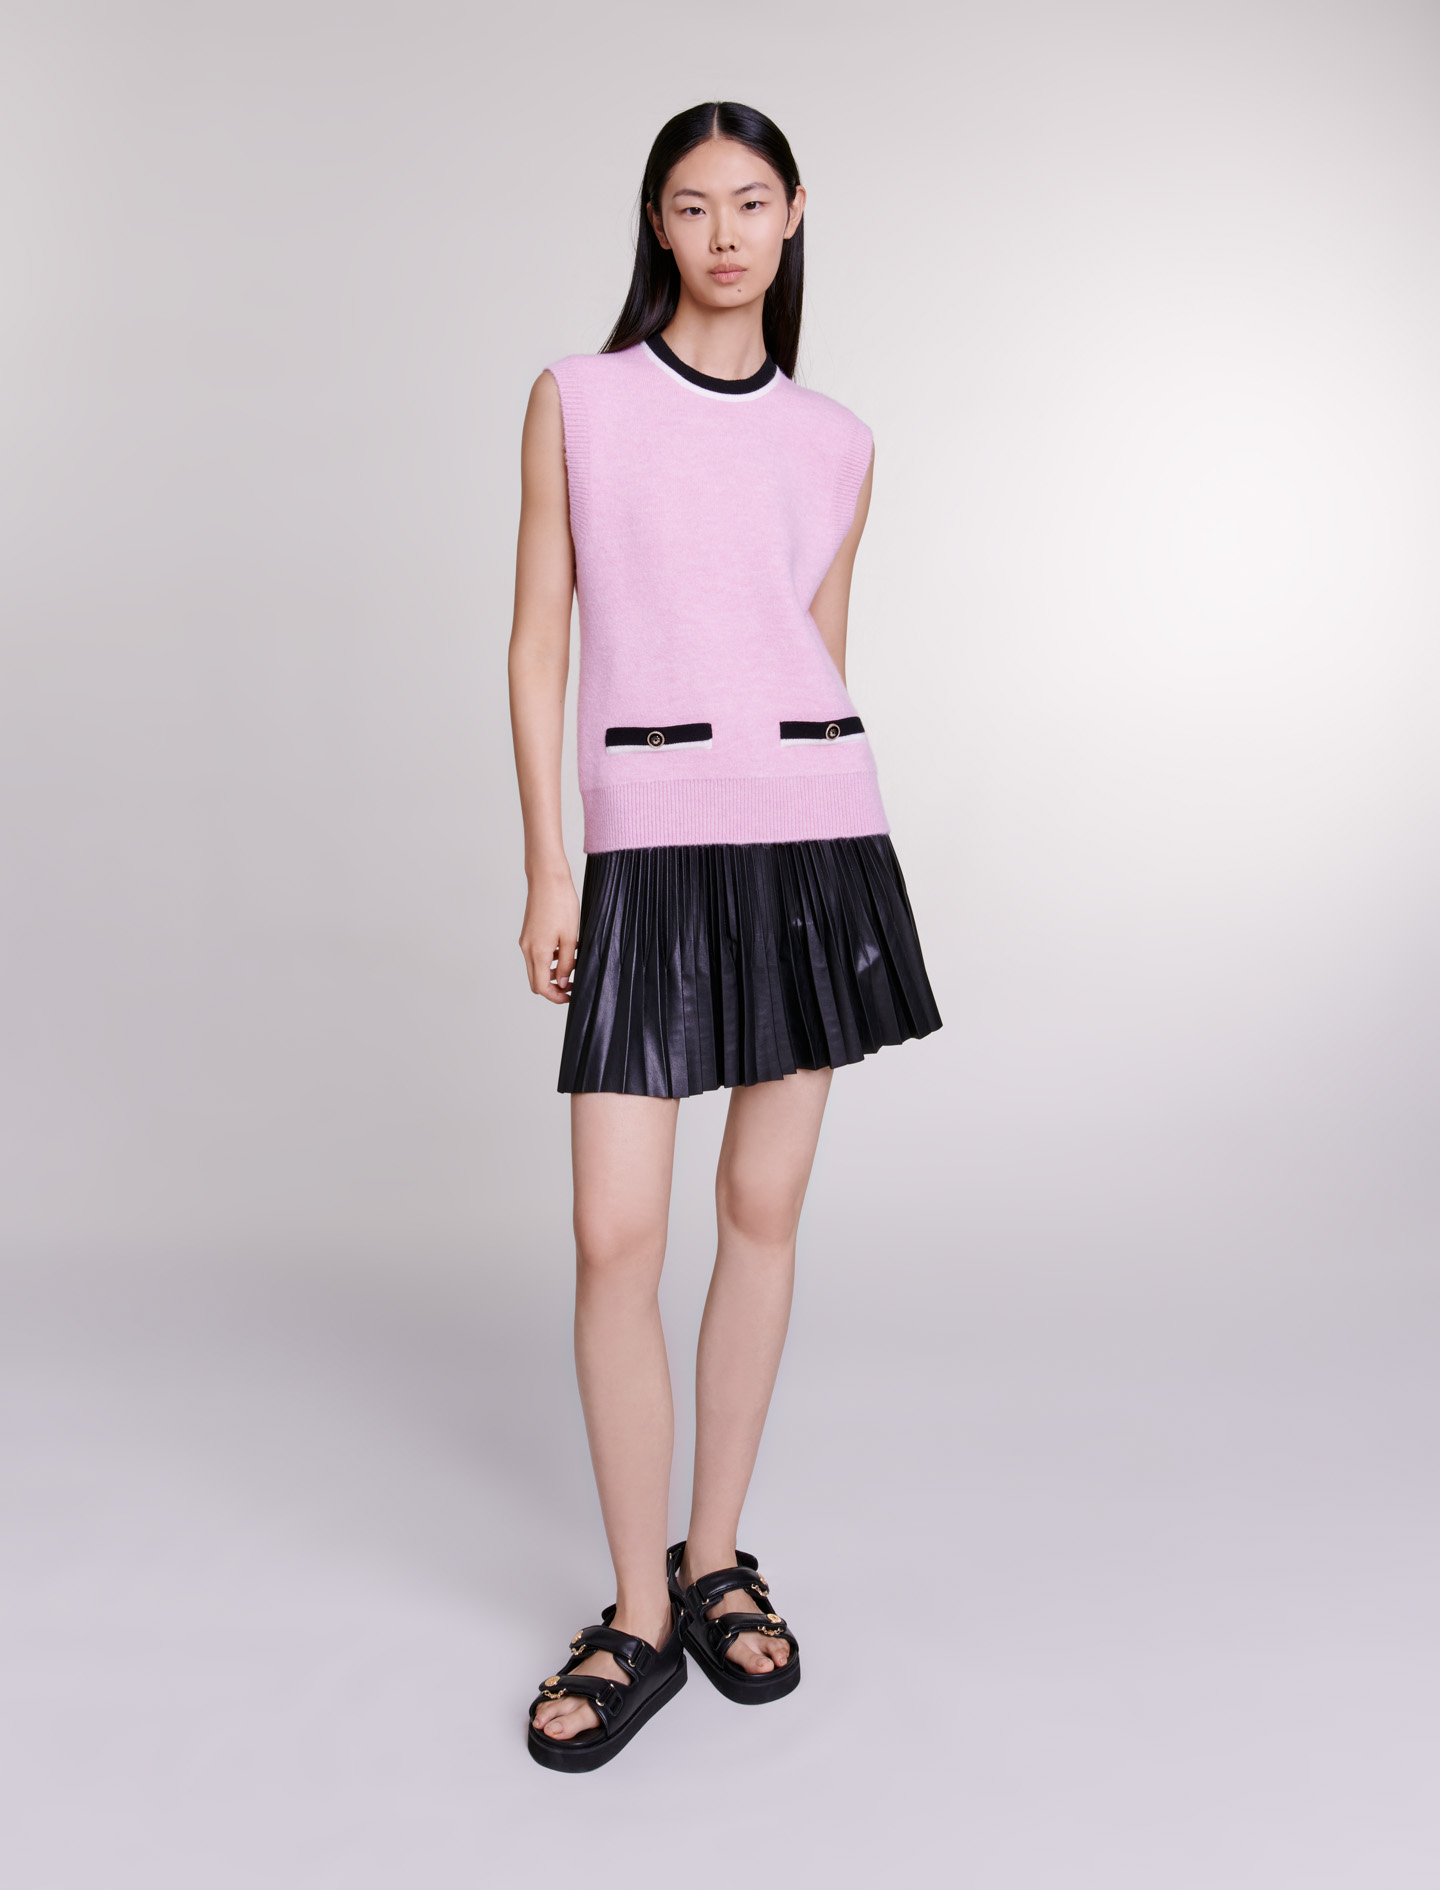 Maje Woman's acrylic, Sleeveless jumper for Spring/Summer, in color pink / black /